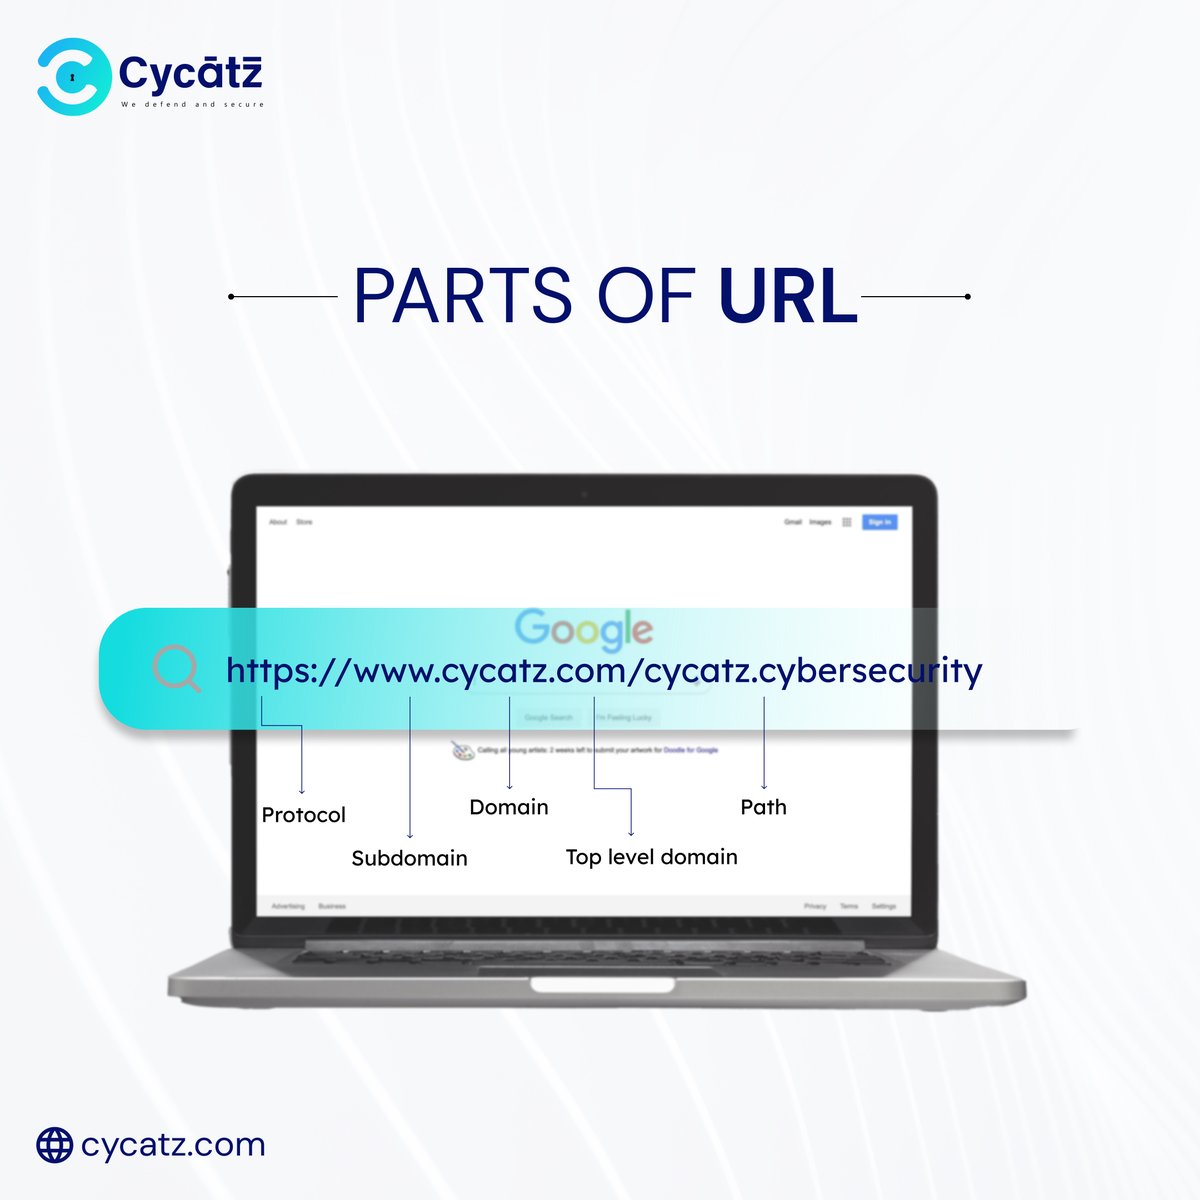 #CyCatz #cybersecurity Parts of URL

#SurfaceWebMonitoring #mobilesecurity #emailsecurity #vendorriskmanagement #BrandMonitoring #cyber #security